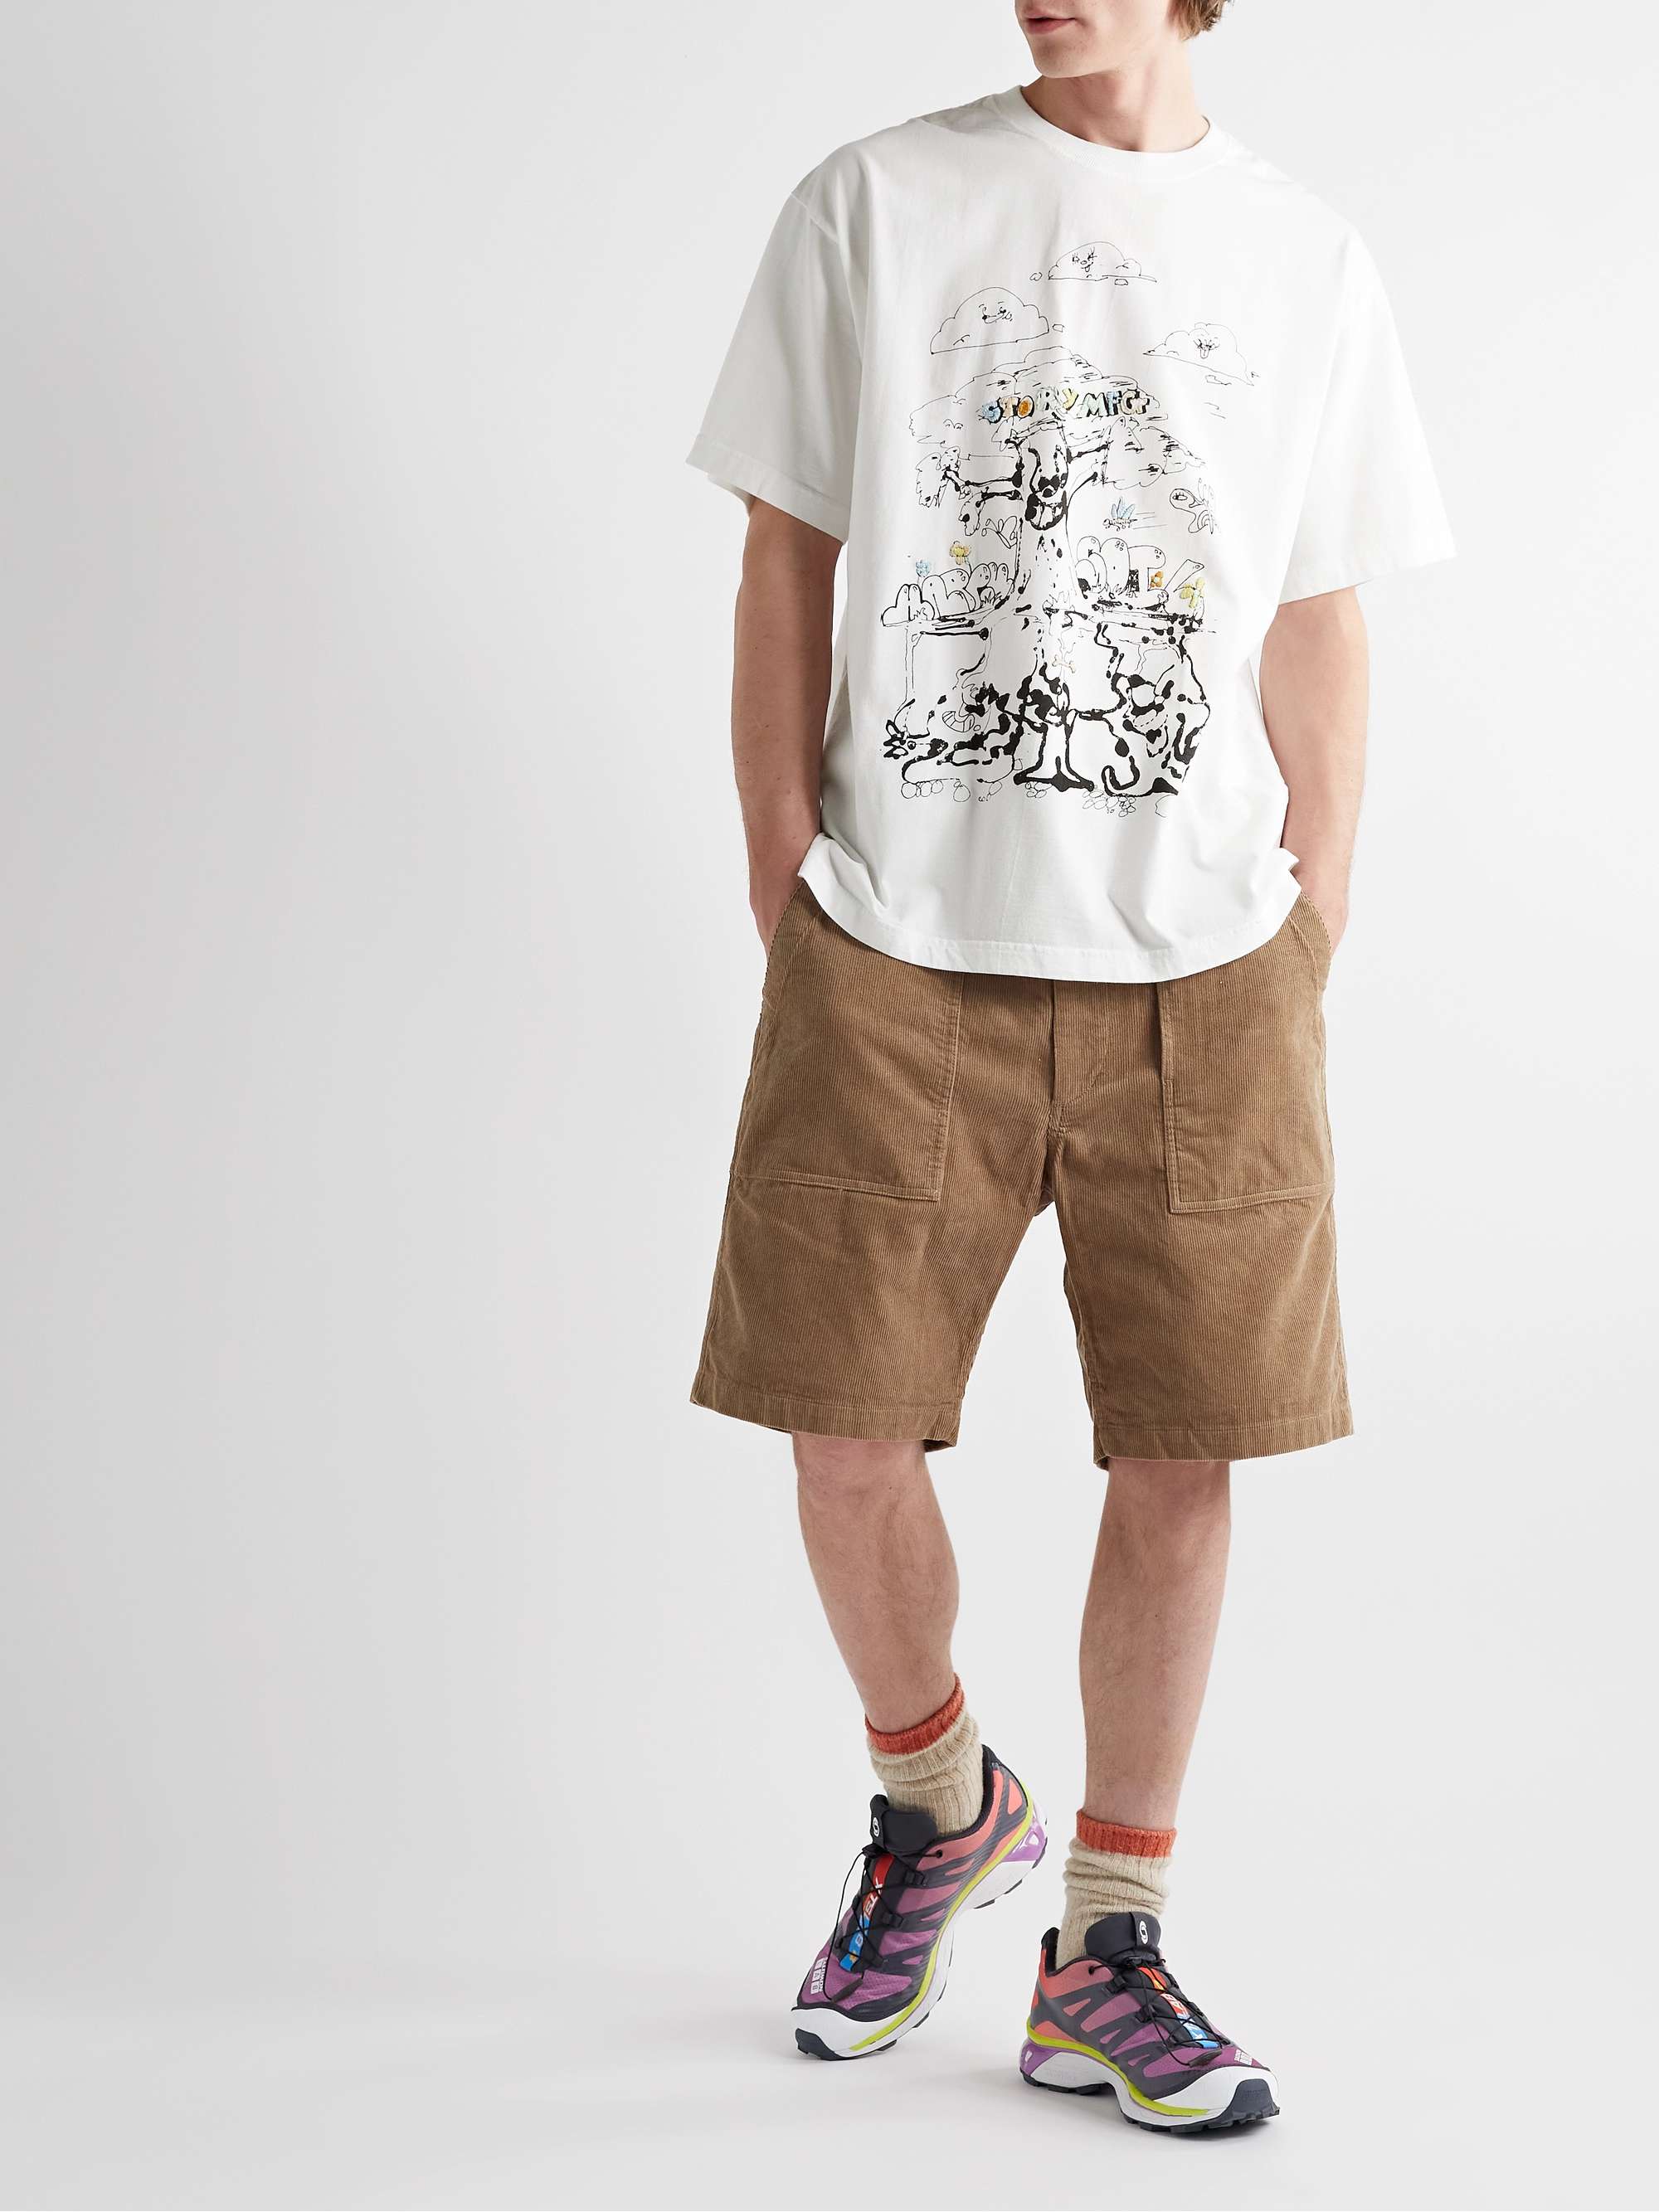 STORY MFG. Embroidered Printed Organic Cotton-Jersey T-Shirt